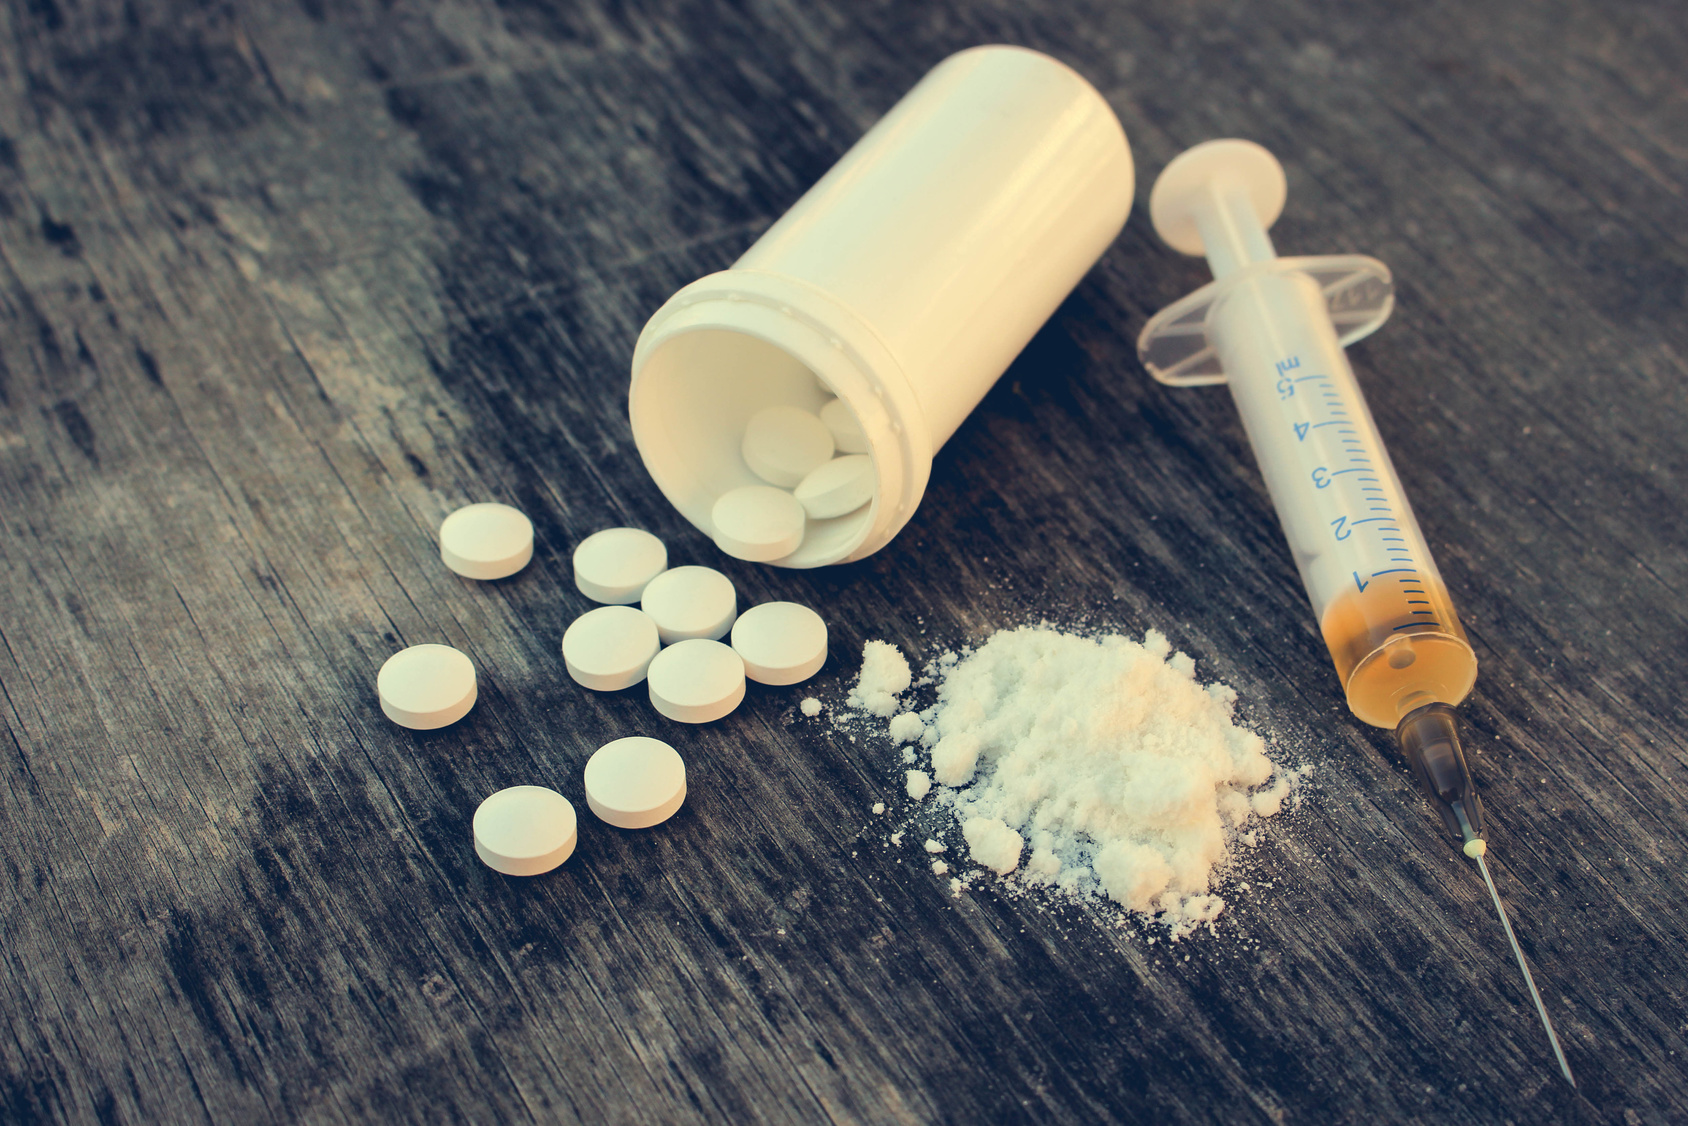 Case Study: When Chronic Pain Leads to a Dangerous Addiction